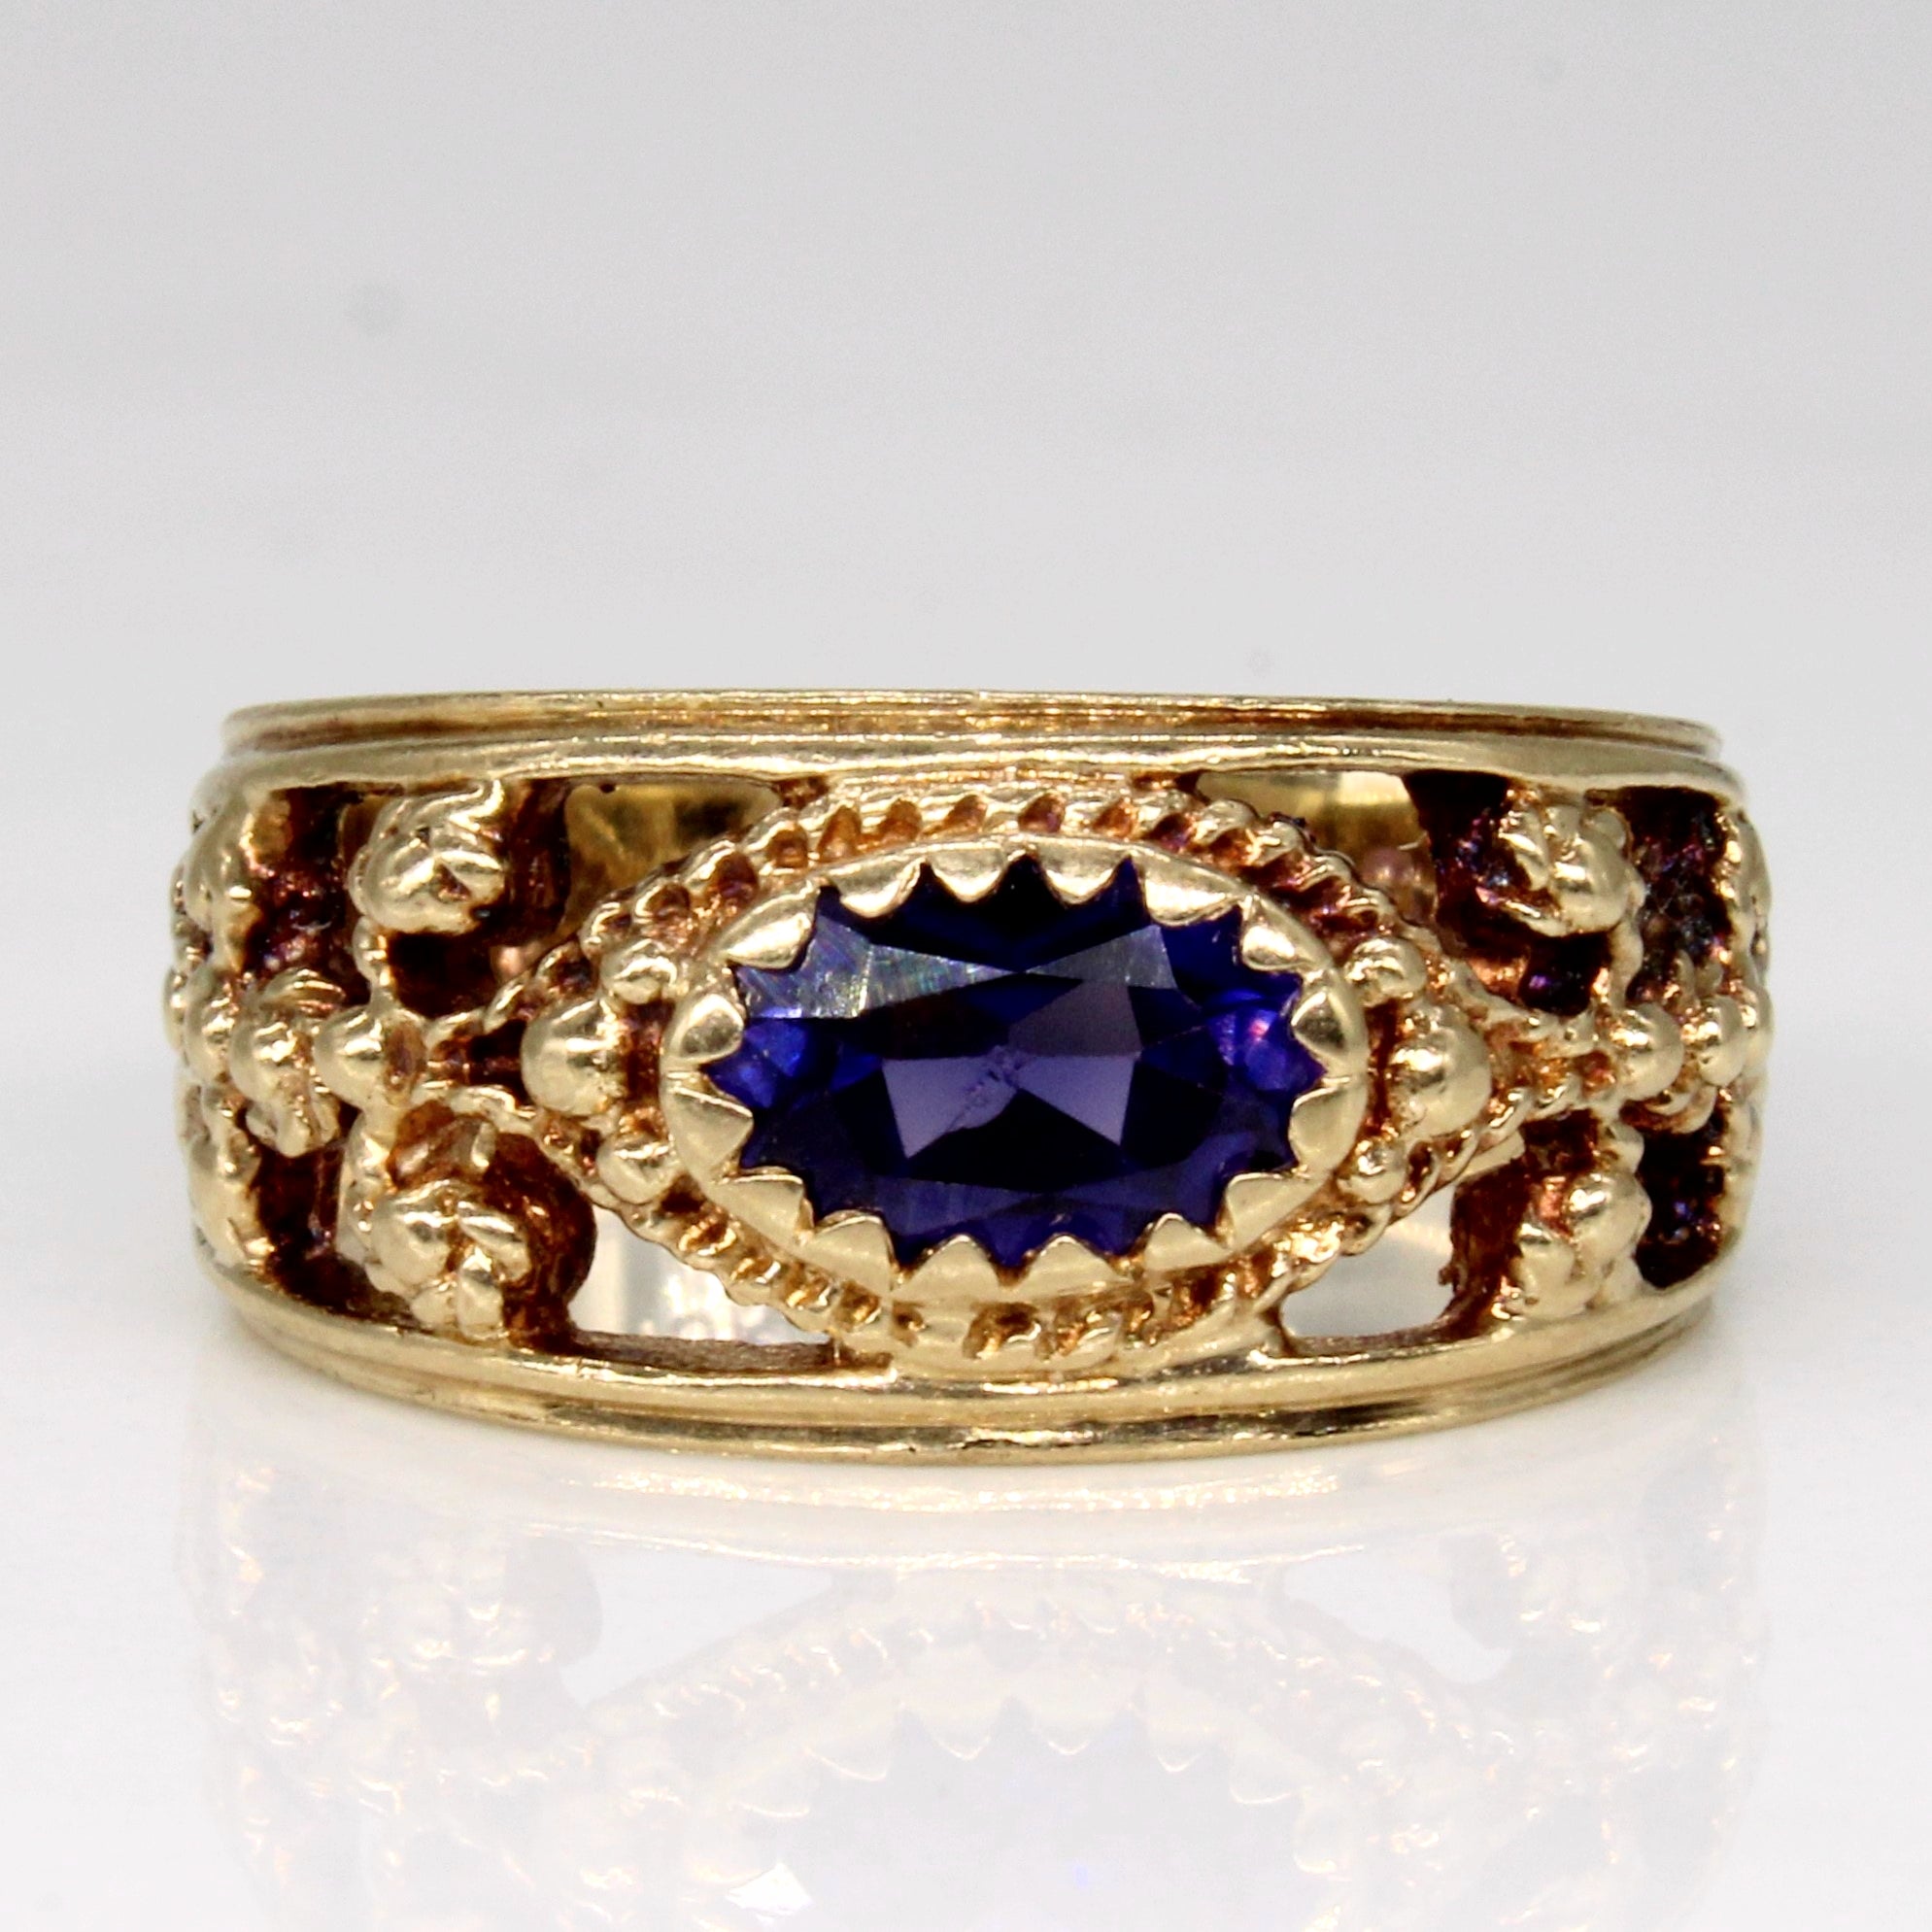 Synthetic Sapphire Ornate Ring | 0.65ct | SZ 5.5 |